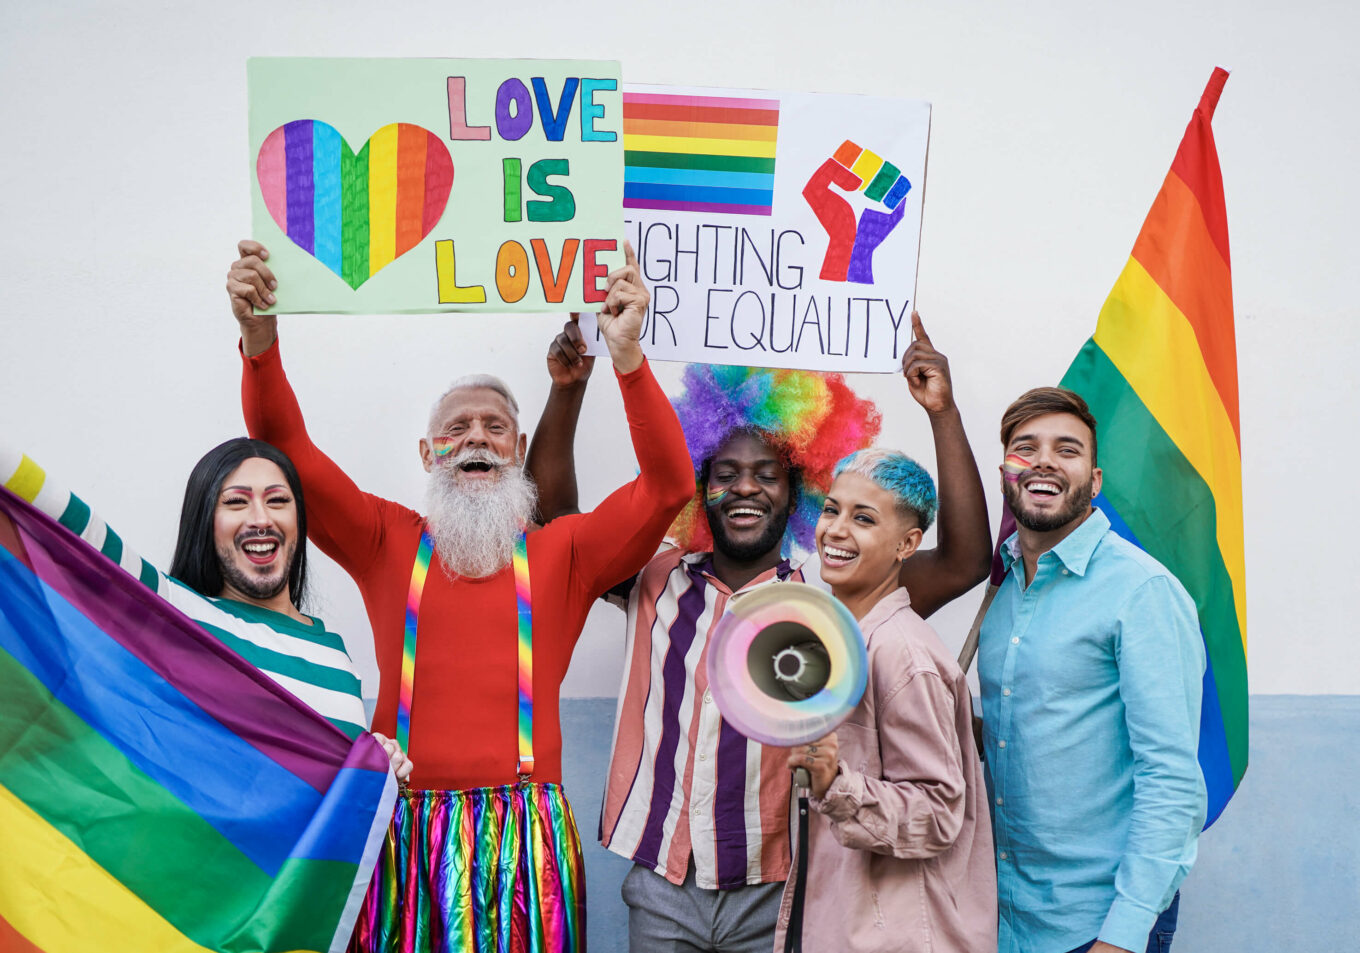 Happy multiracial people laughing with banner at gay pride parade - Homosexual love by SabrinaBracher. Asset appears to be at a Pride march. 

